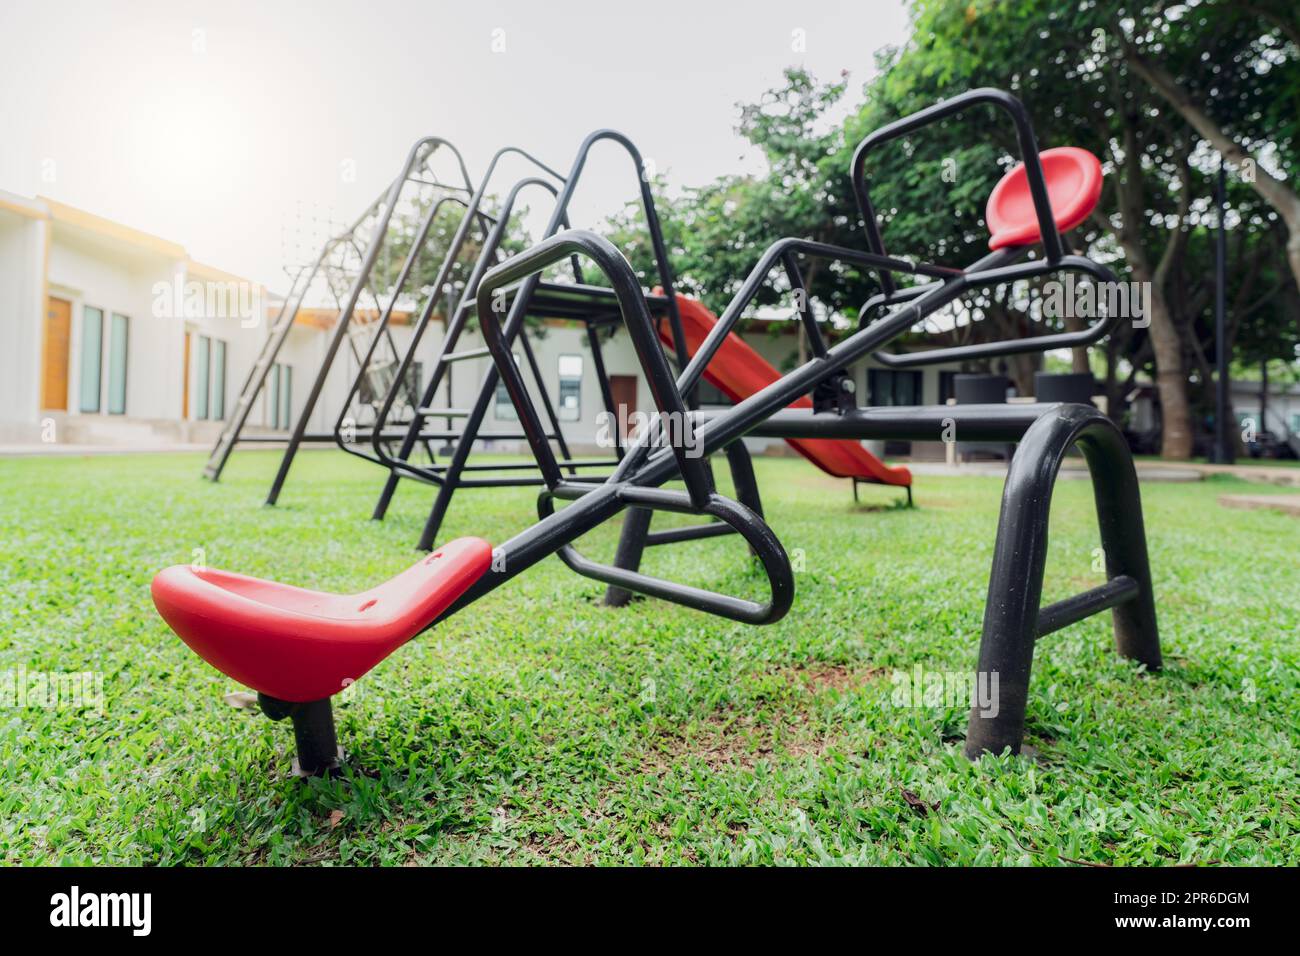 Red seesaw in the playground. Playground equipment for children to play. Plastic seesaw or teeter-totter, swing, and slide at outdoor playground with green grass ground. Outdoor kids toy at park. Stock Photo